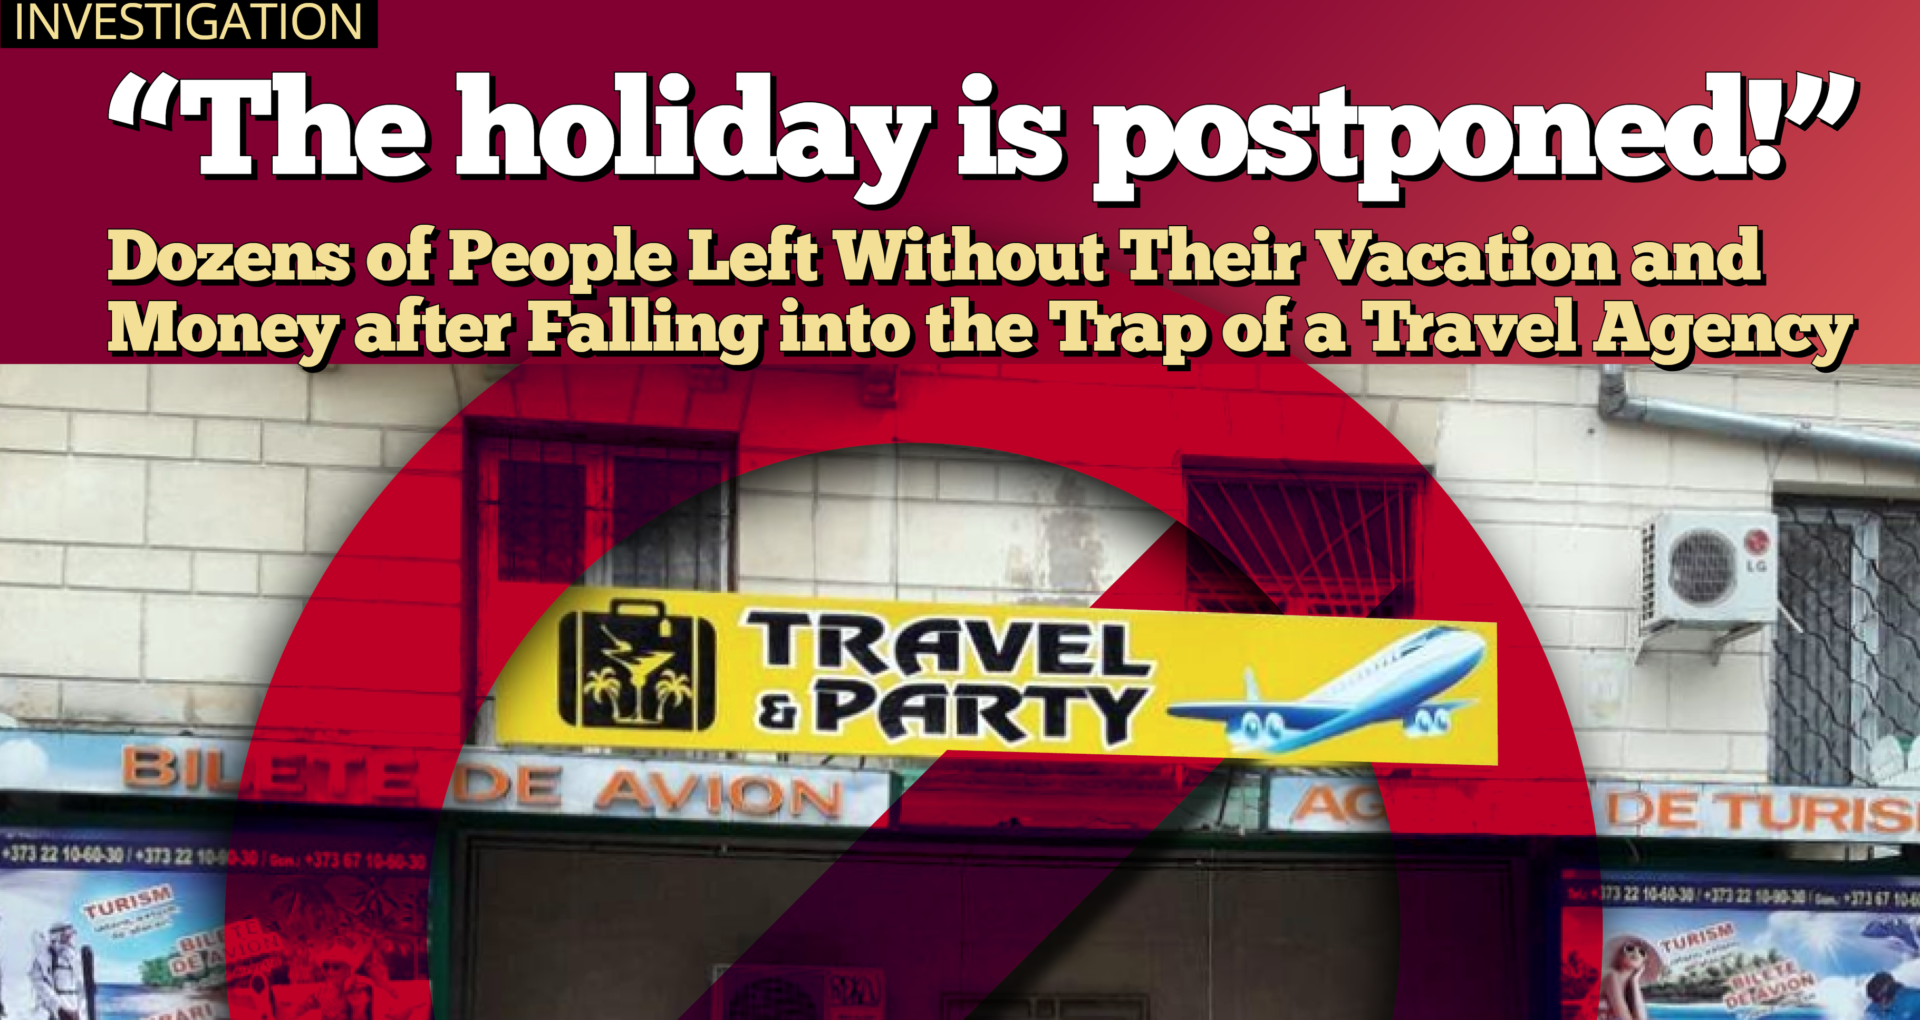 INVESTIGATION: “The holiday is postponed!” Dozens of People Left Without Their Vacation and Money after Falling into the Trap of a Travel Agency